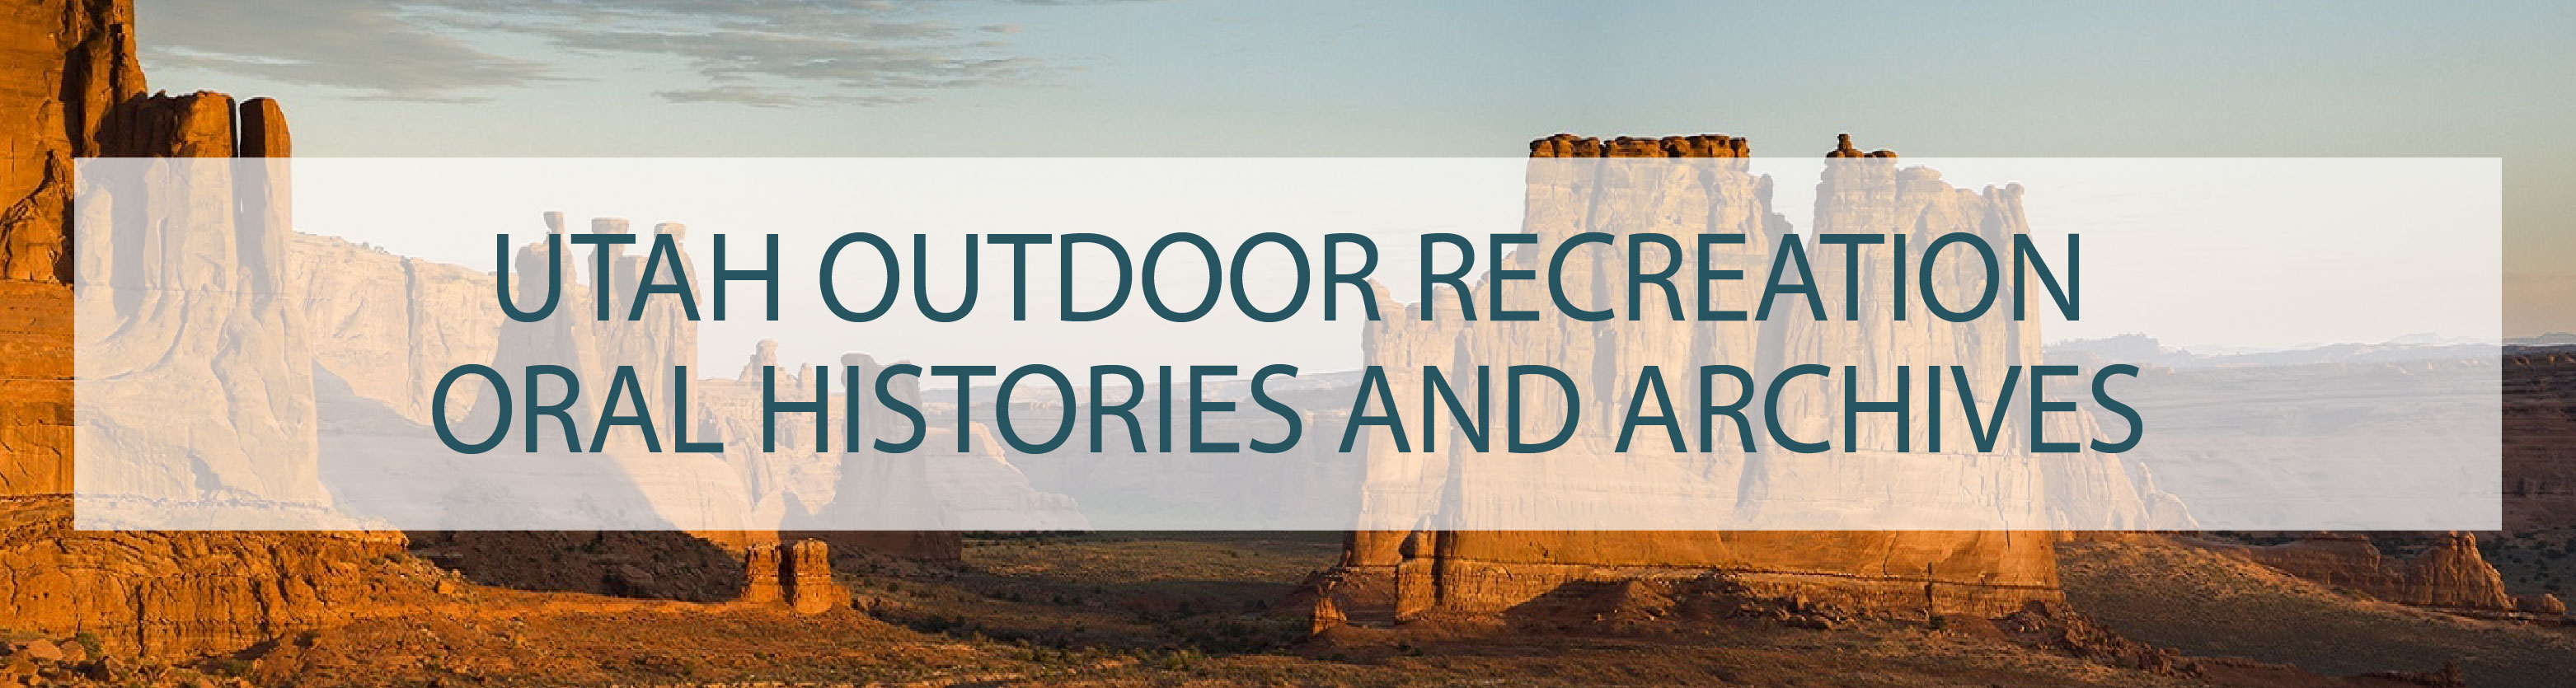 Utah Outdoor Recreation Oral Histories and Archives 